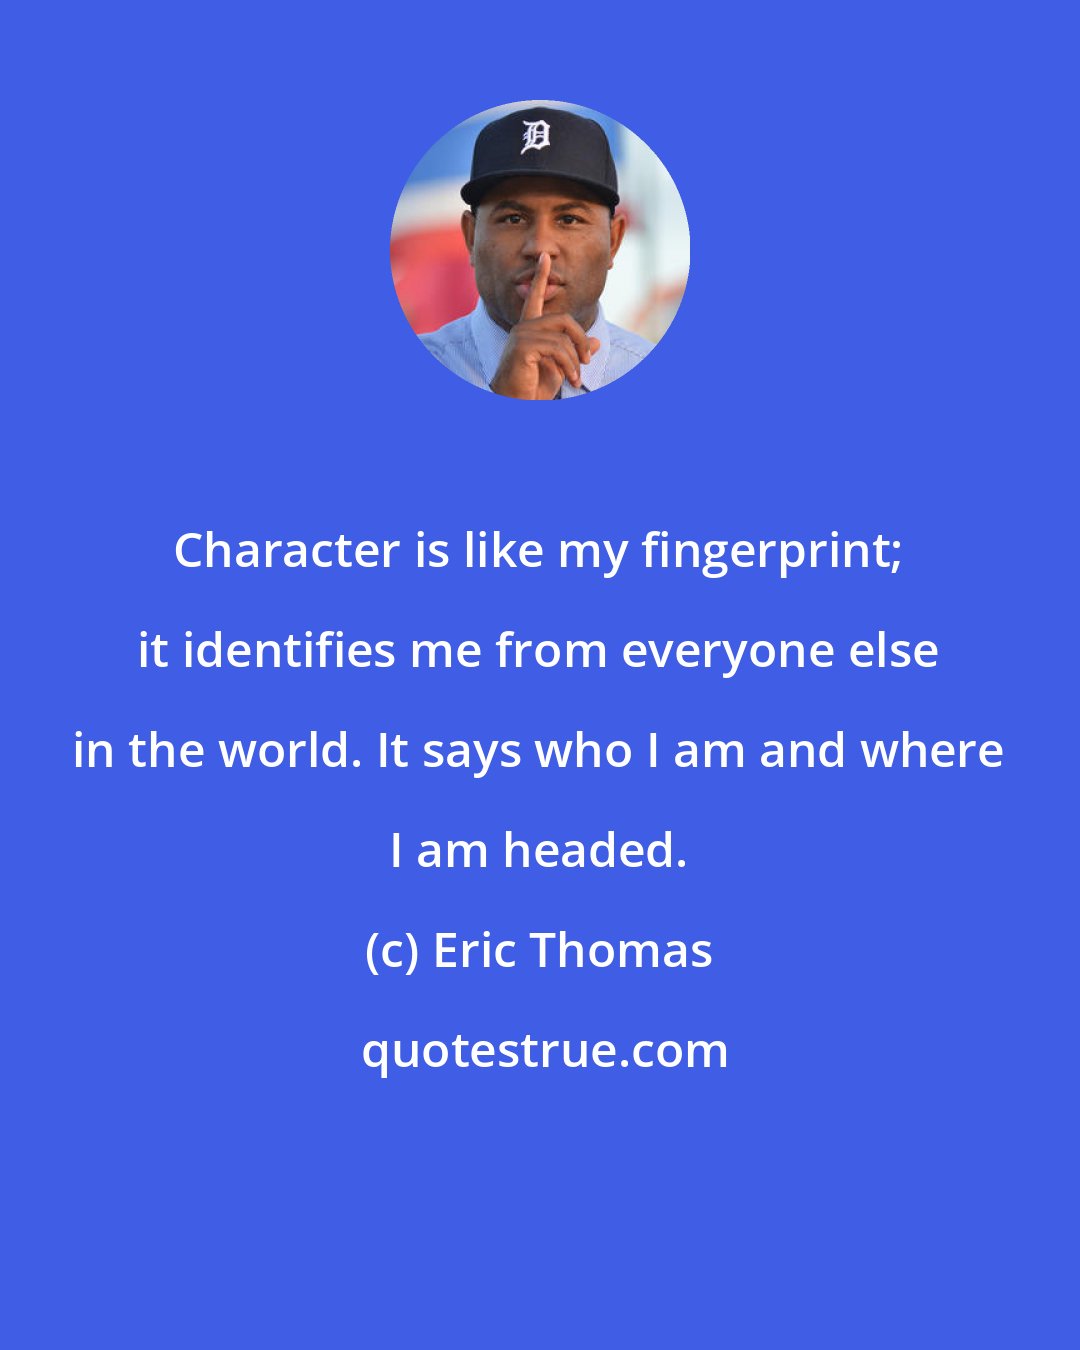 Eric Thomas: Character is like my fingerprint; it identifies me from everyone else in the world. It says who I am and where I am headed.